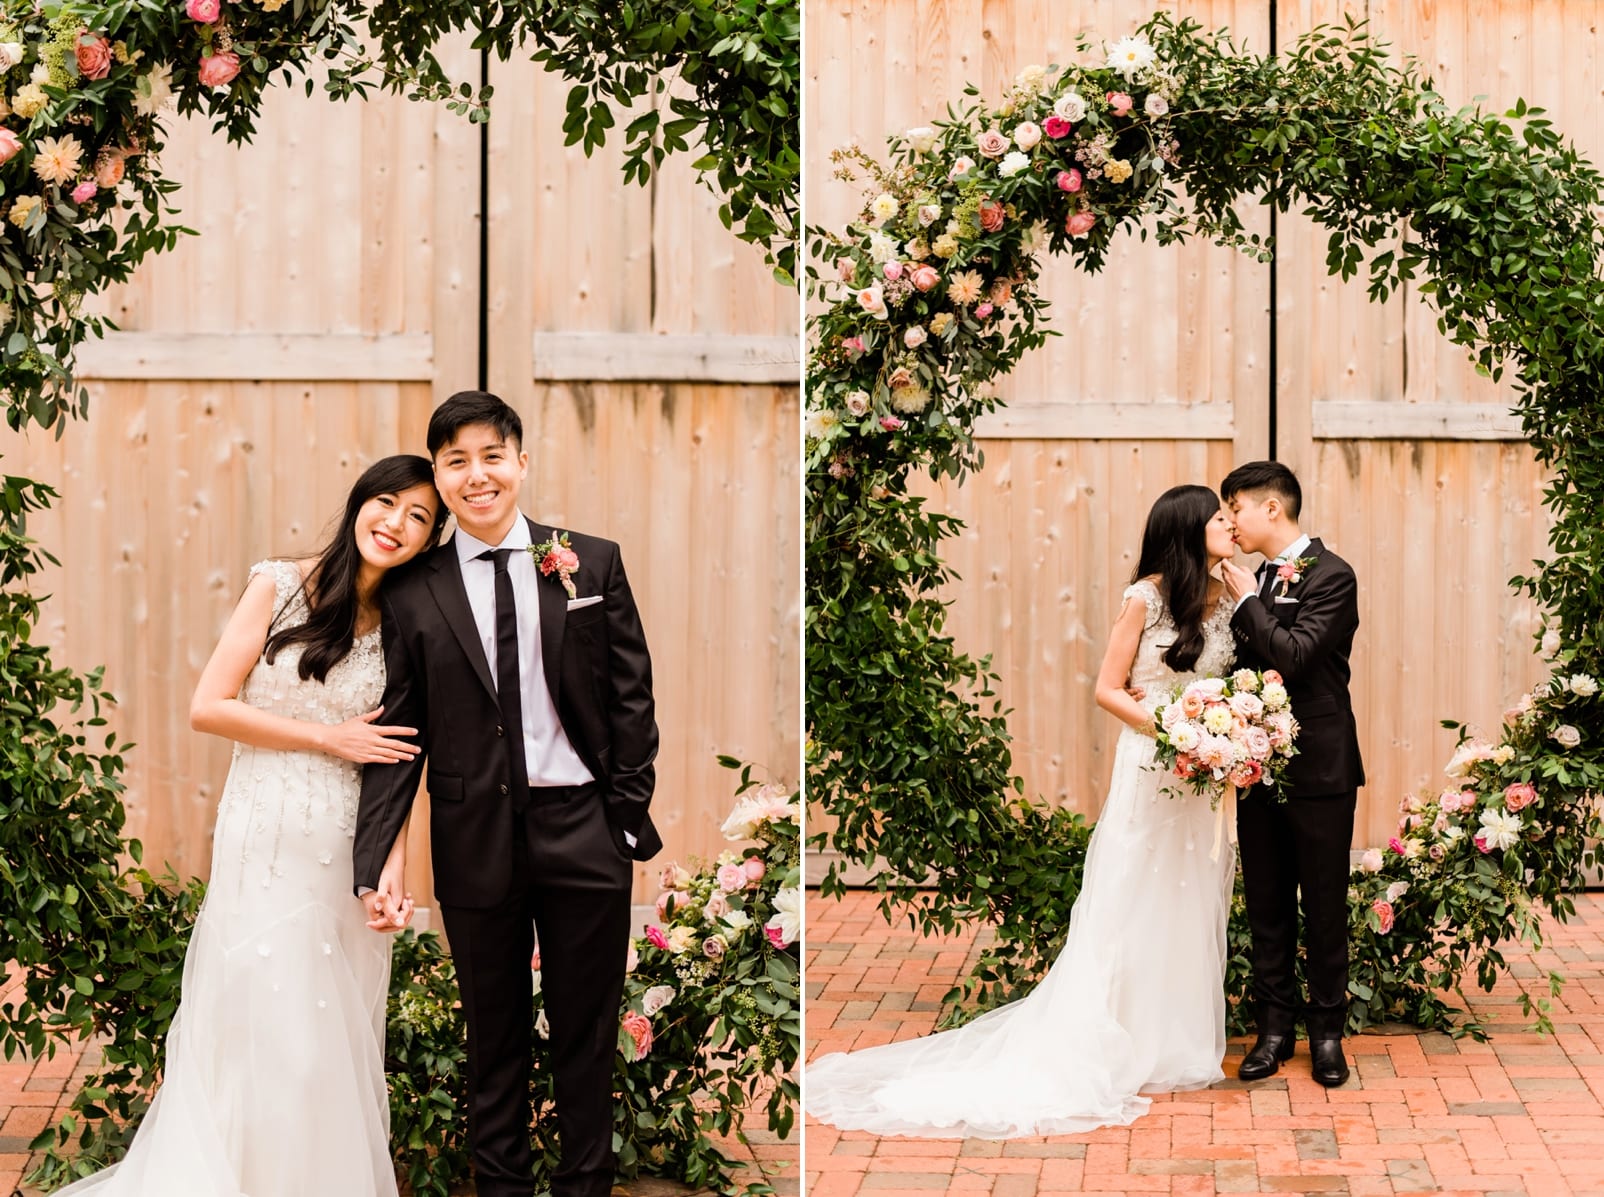 Barn of Chapel Hill bride and groom in front of large circle wreath floral installation photo